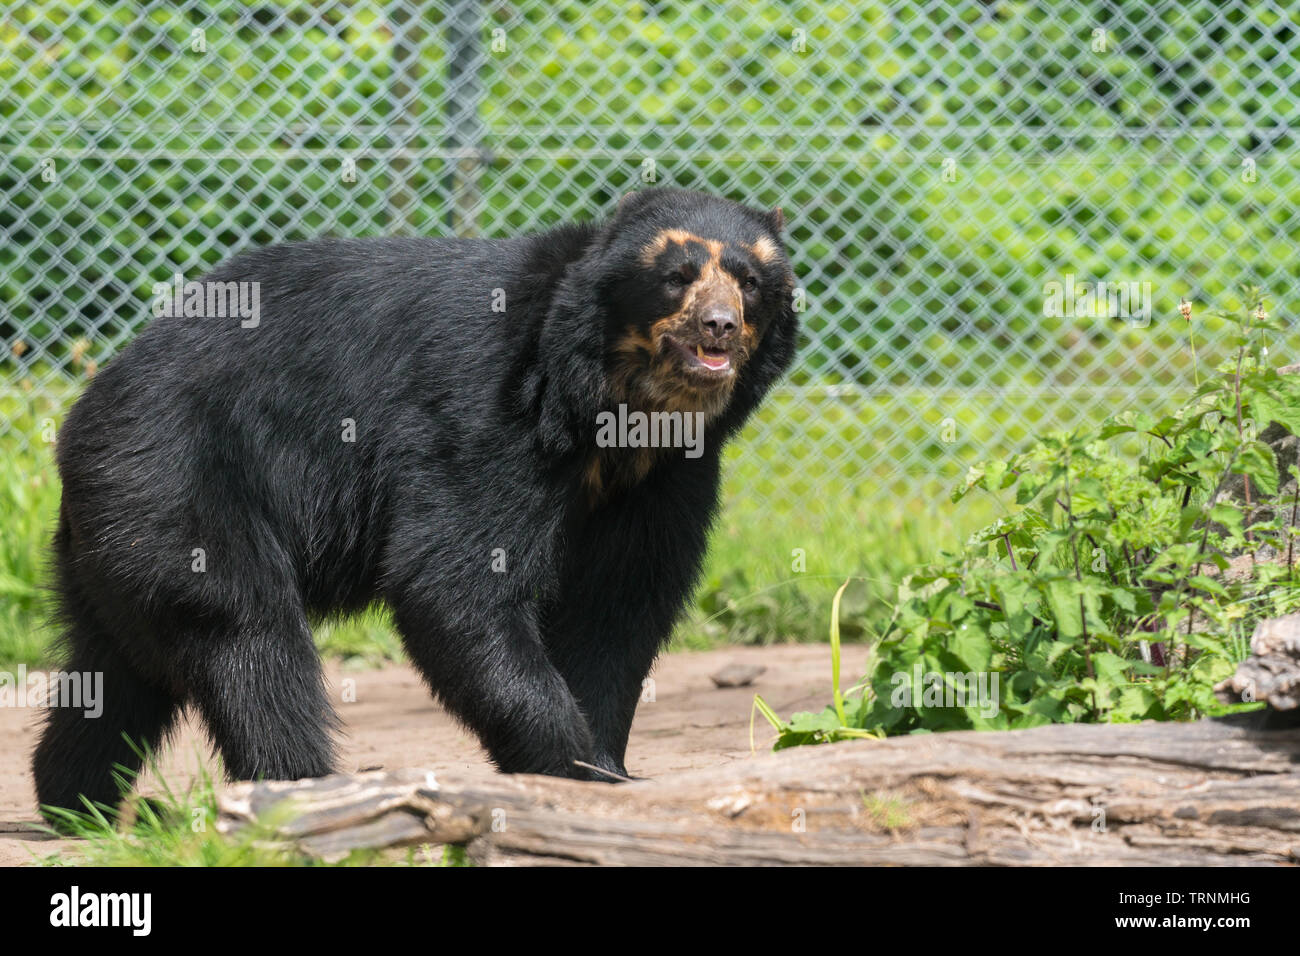 Andean bear (Tremarctos ornatus) also known as the Spectacled bear native to South America. Chester zoo Cheshire England UK. May 2019 Stock Photo